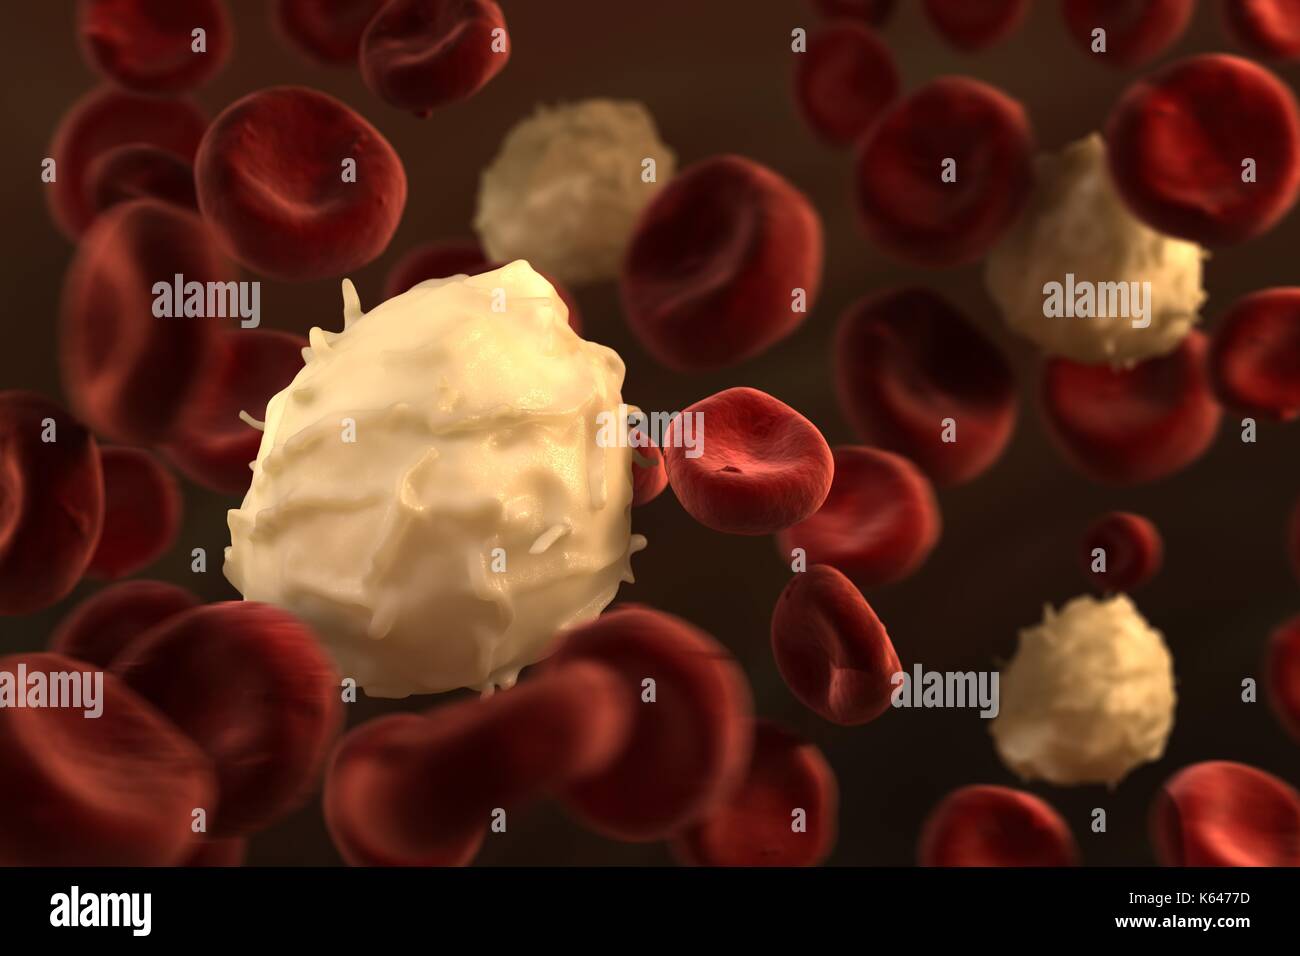 Highly detailed close-up of specialized white blood cell (basophil) flowing in blood stream. Stock Photo